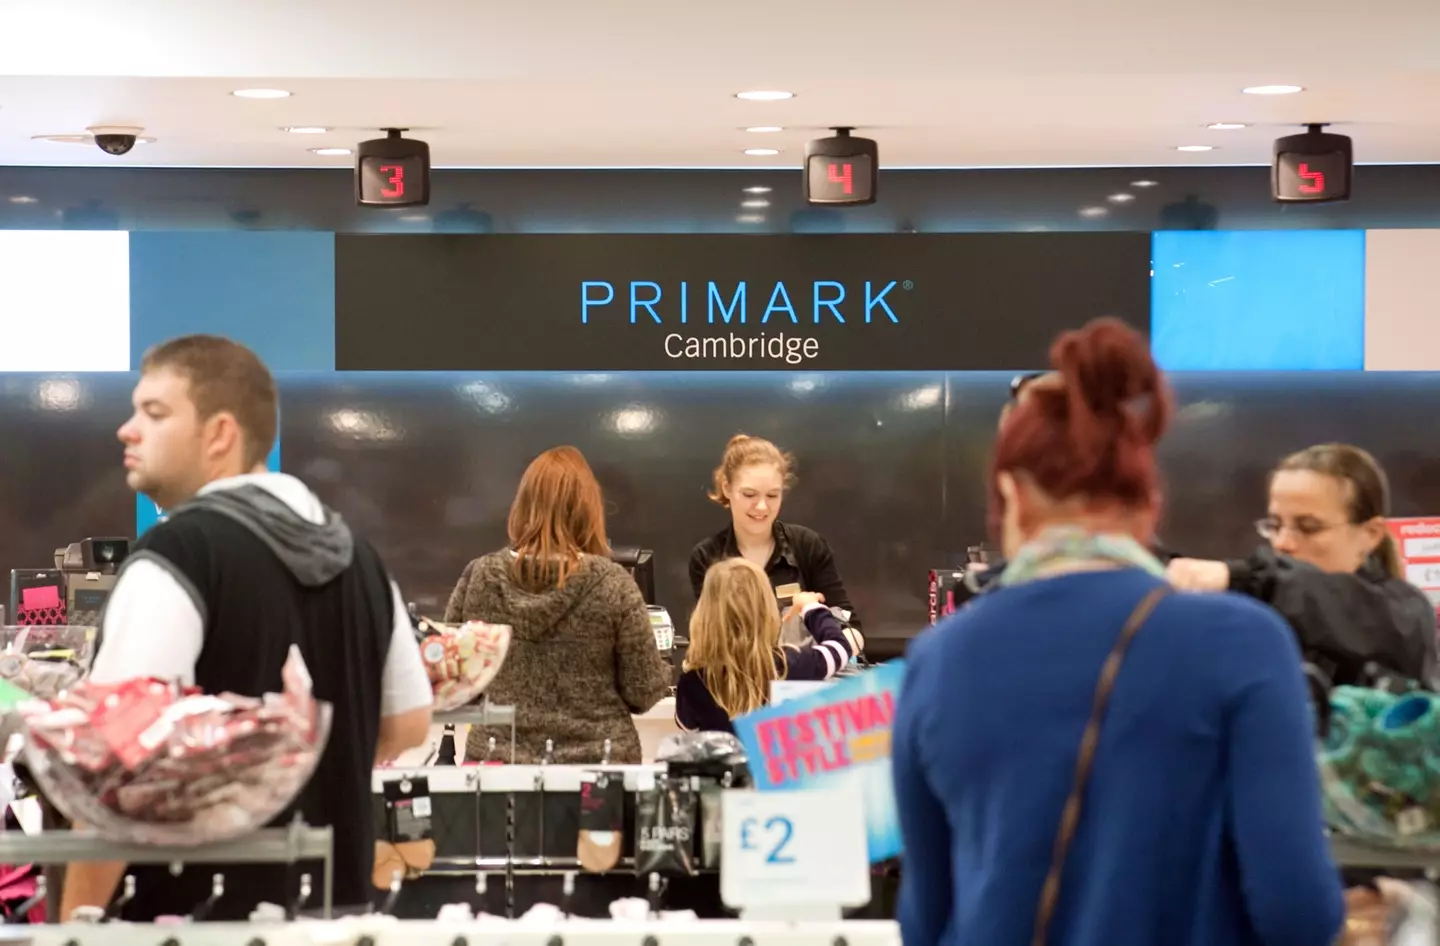 Charlotte was at a Primark in Cambridge when the incidents occurred.